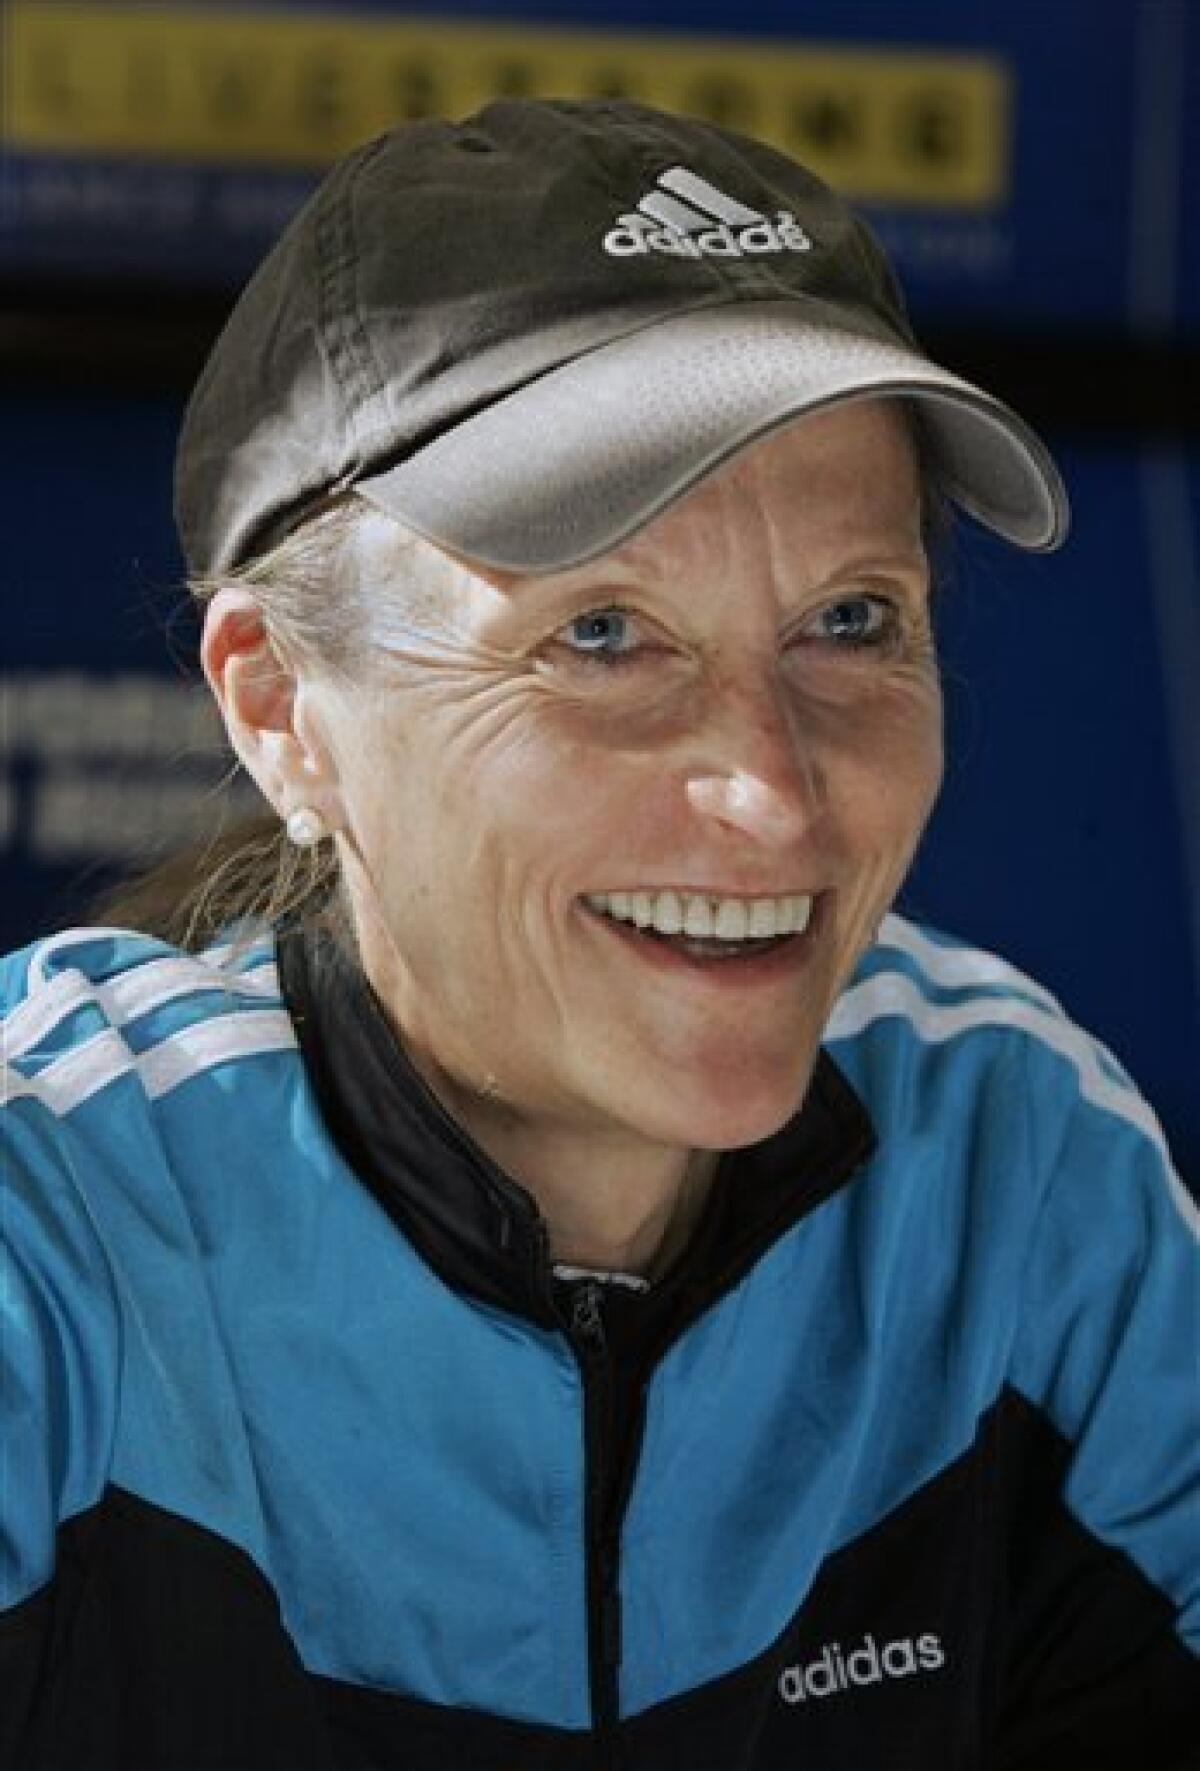 This photo taken Nov. 3, 2006 shows Grete Waitz, nine-time New York City marathon winner, smiles at a New York news conference. A 10-kilometer race next month in Central Park will be dedicated to the Waitz, who died last month at 57 from cancer, as part of a season-long tribute to the winner of a record nine New York City Marathons. (AP Photo/Richard Drew)